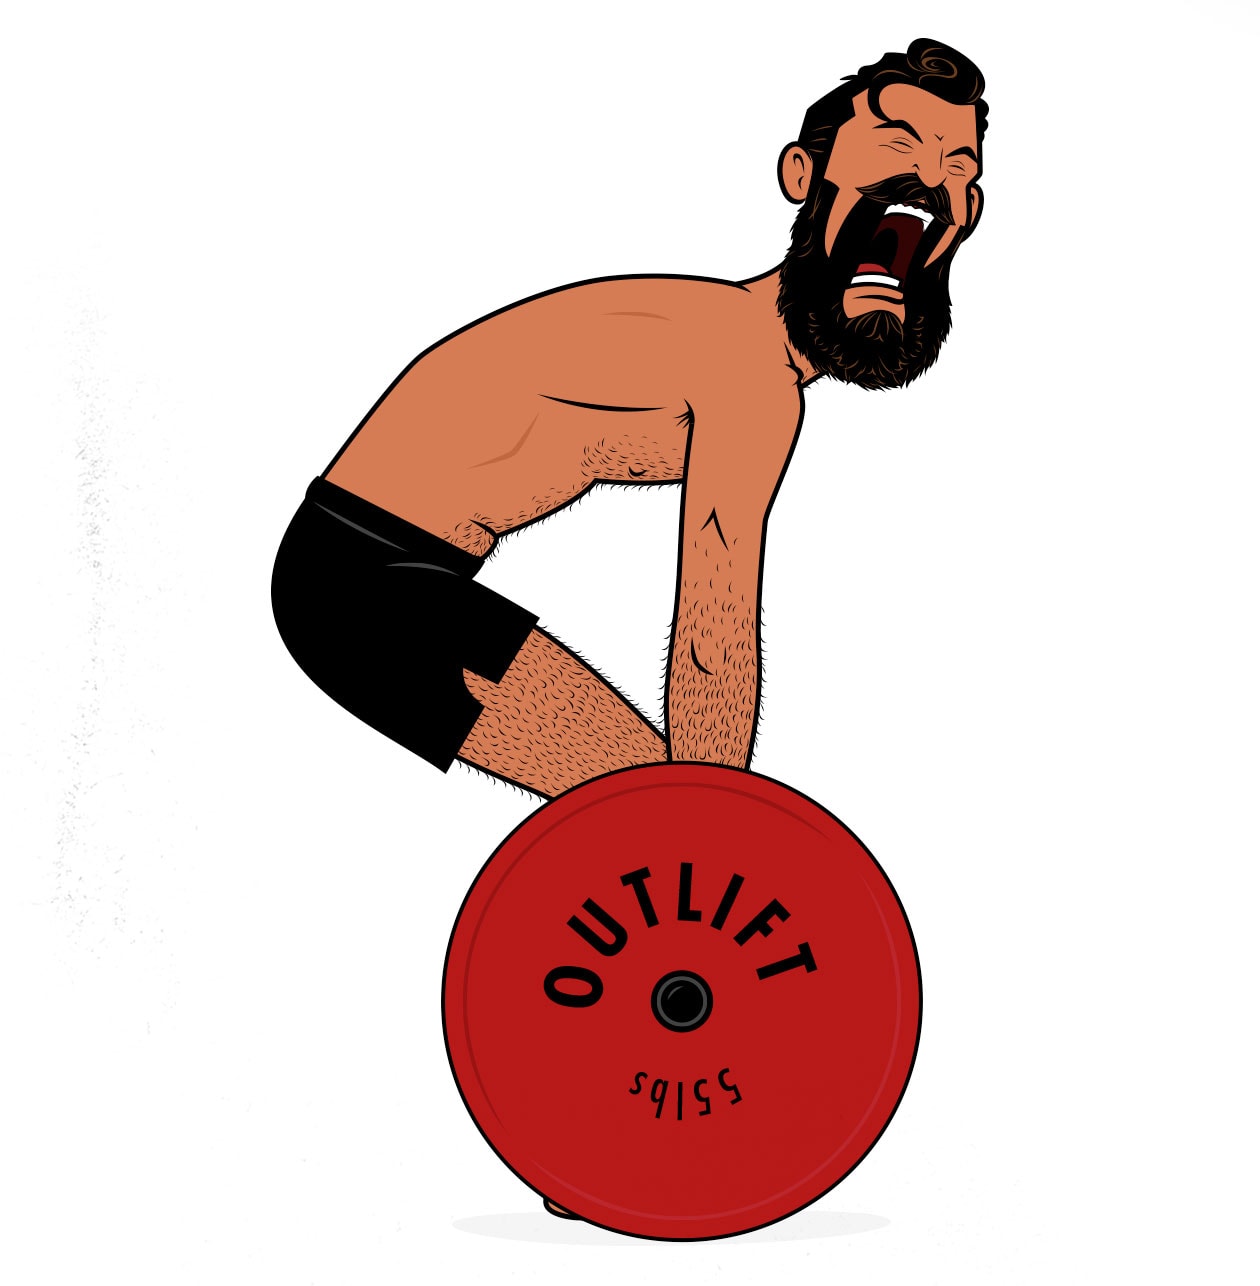 Cartoon illustration of a beginner deadlifting with a rounded back.